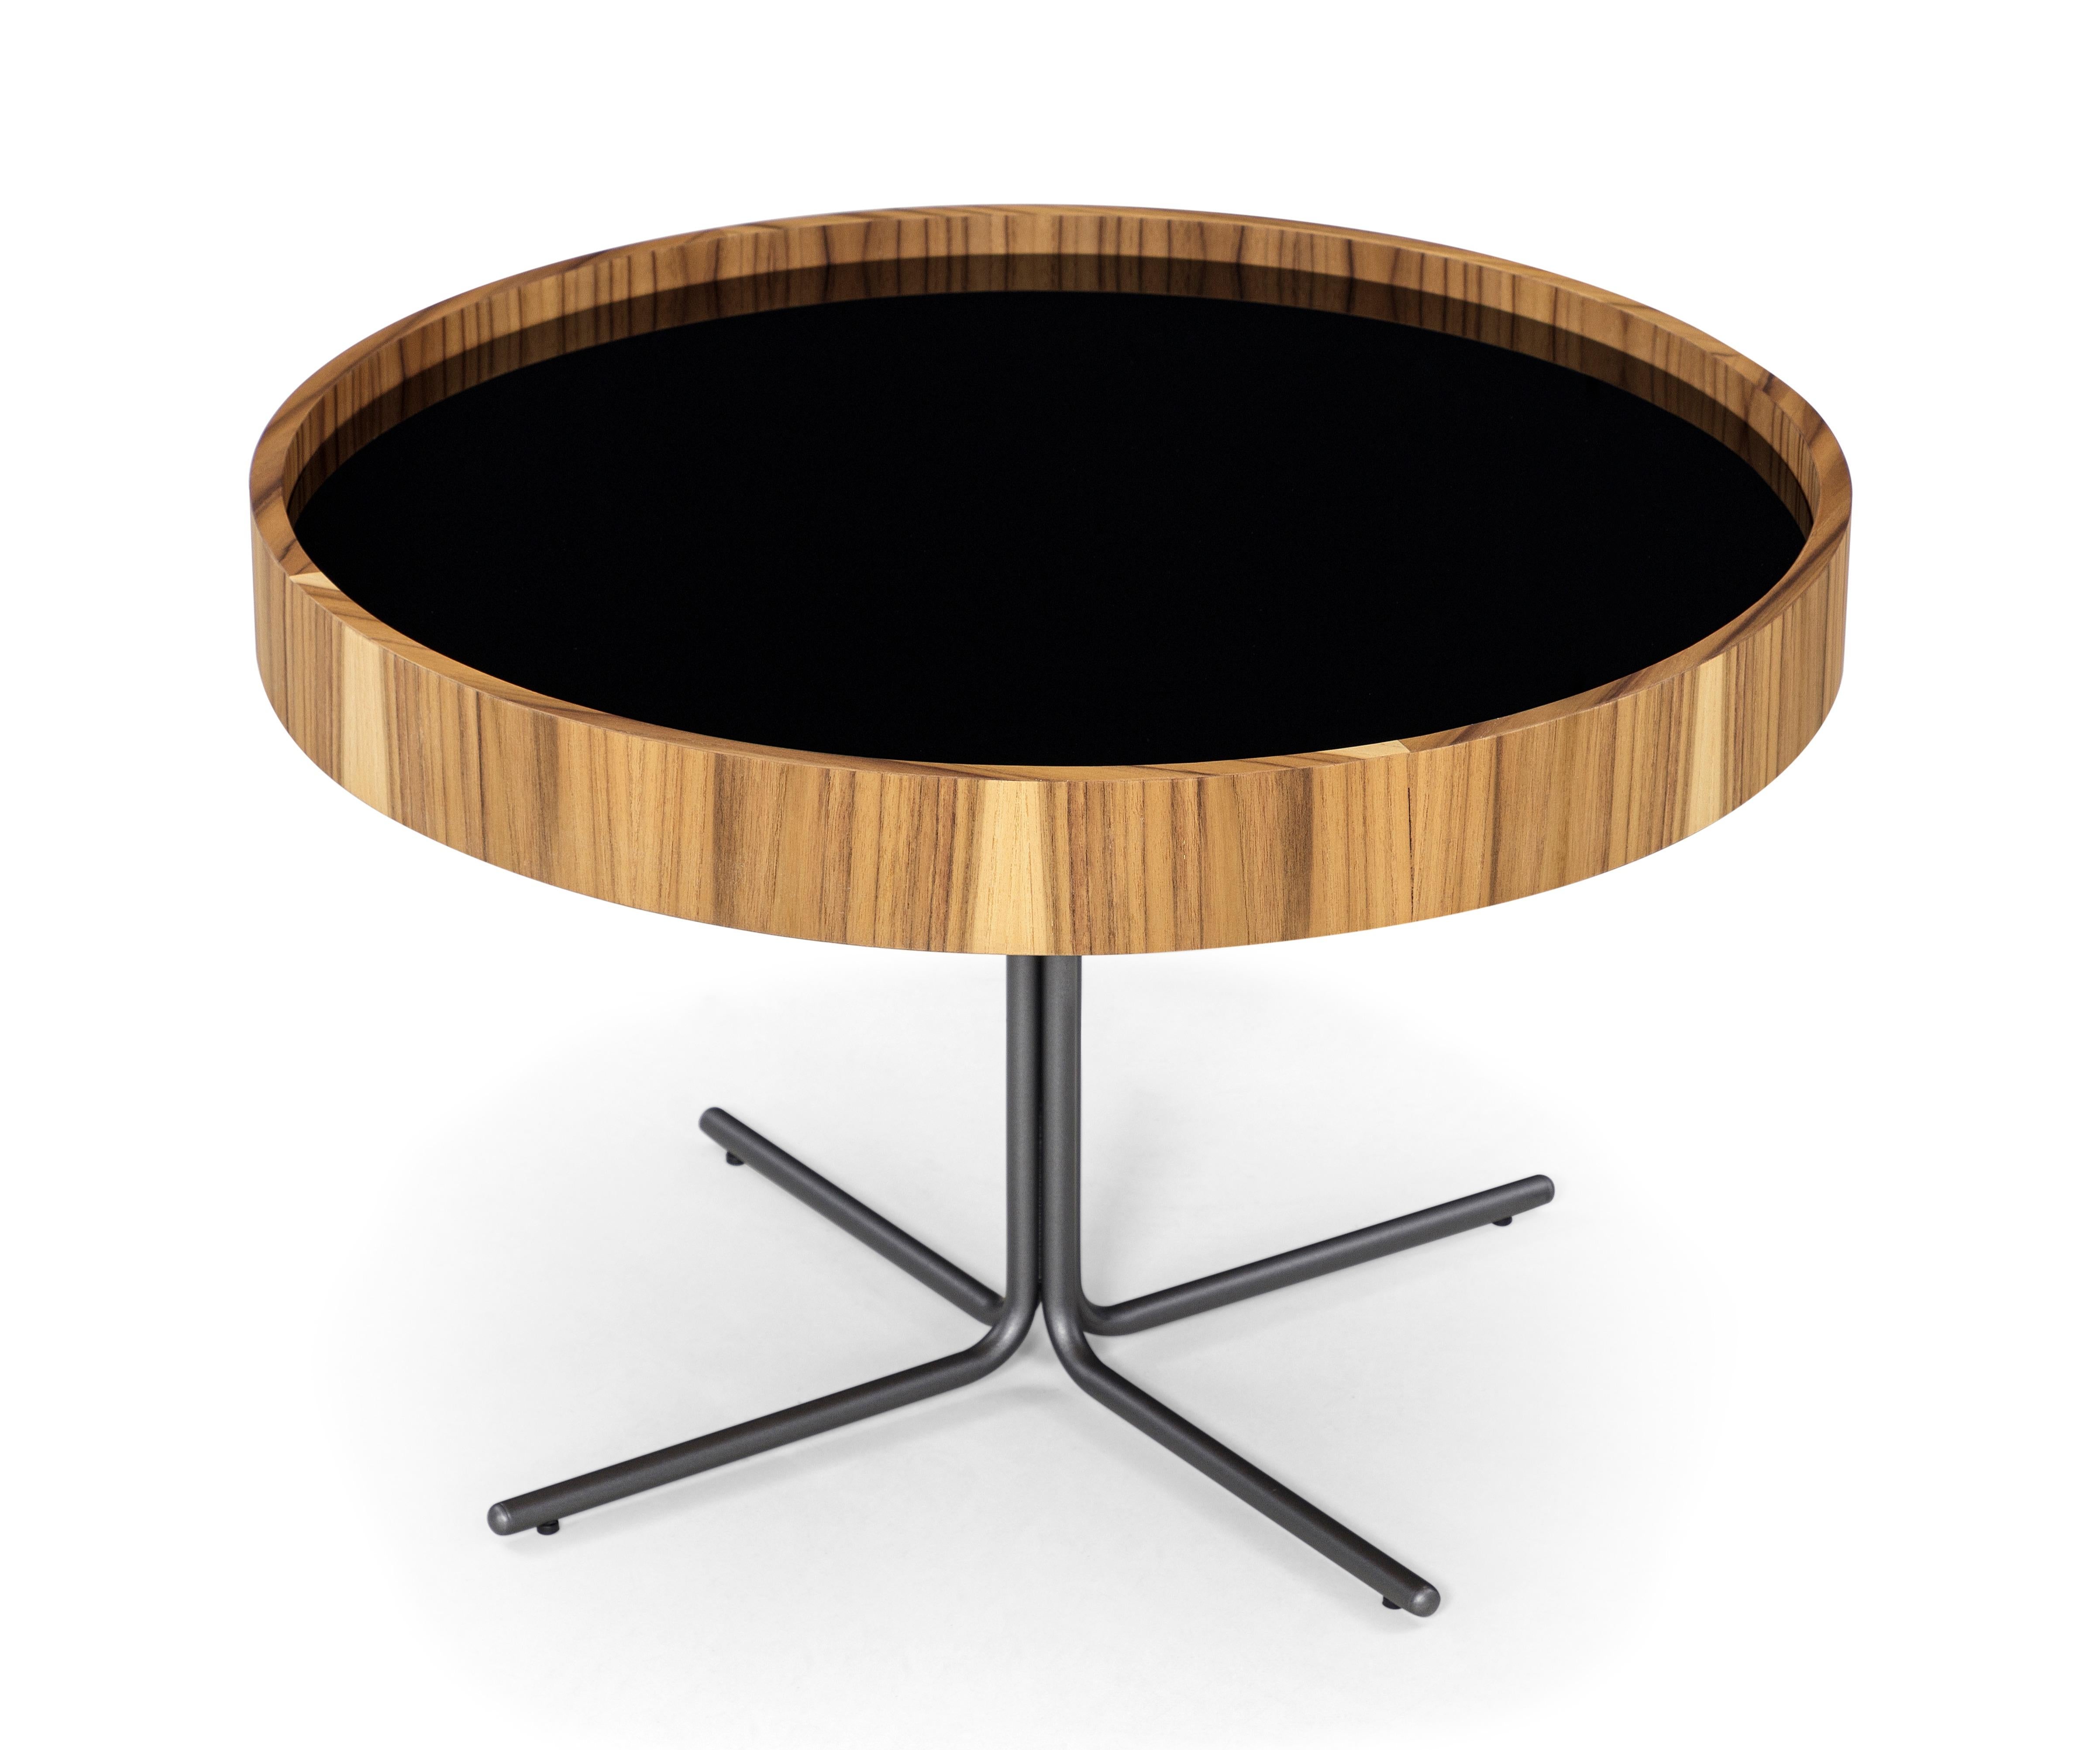 The stunning Regia occasional table consists of a tabletop in black Nero glass combined with a Teak rim and stainless steel legs with a polished finish. The Regia table is yet another minimalist or contemporary fashion statement from Uultis that